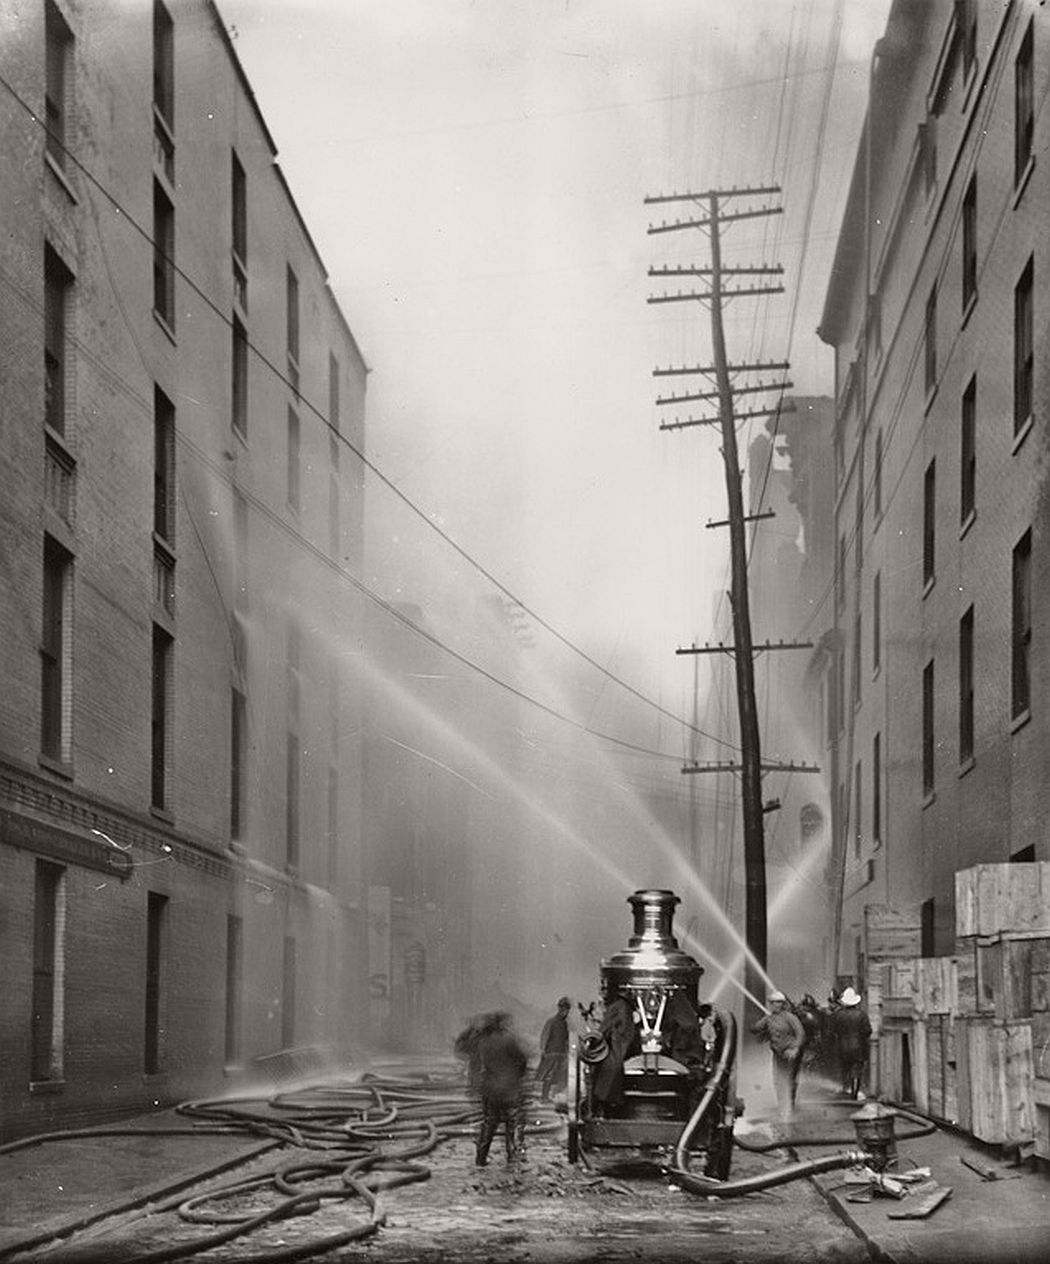 Firefighters spraying water on buildings along German St. during 1904 fire